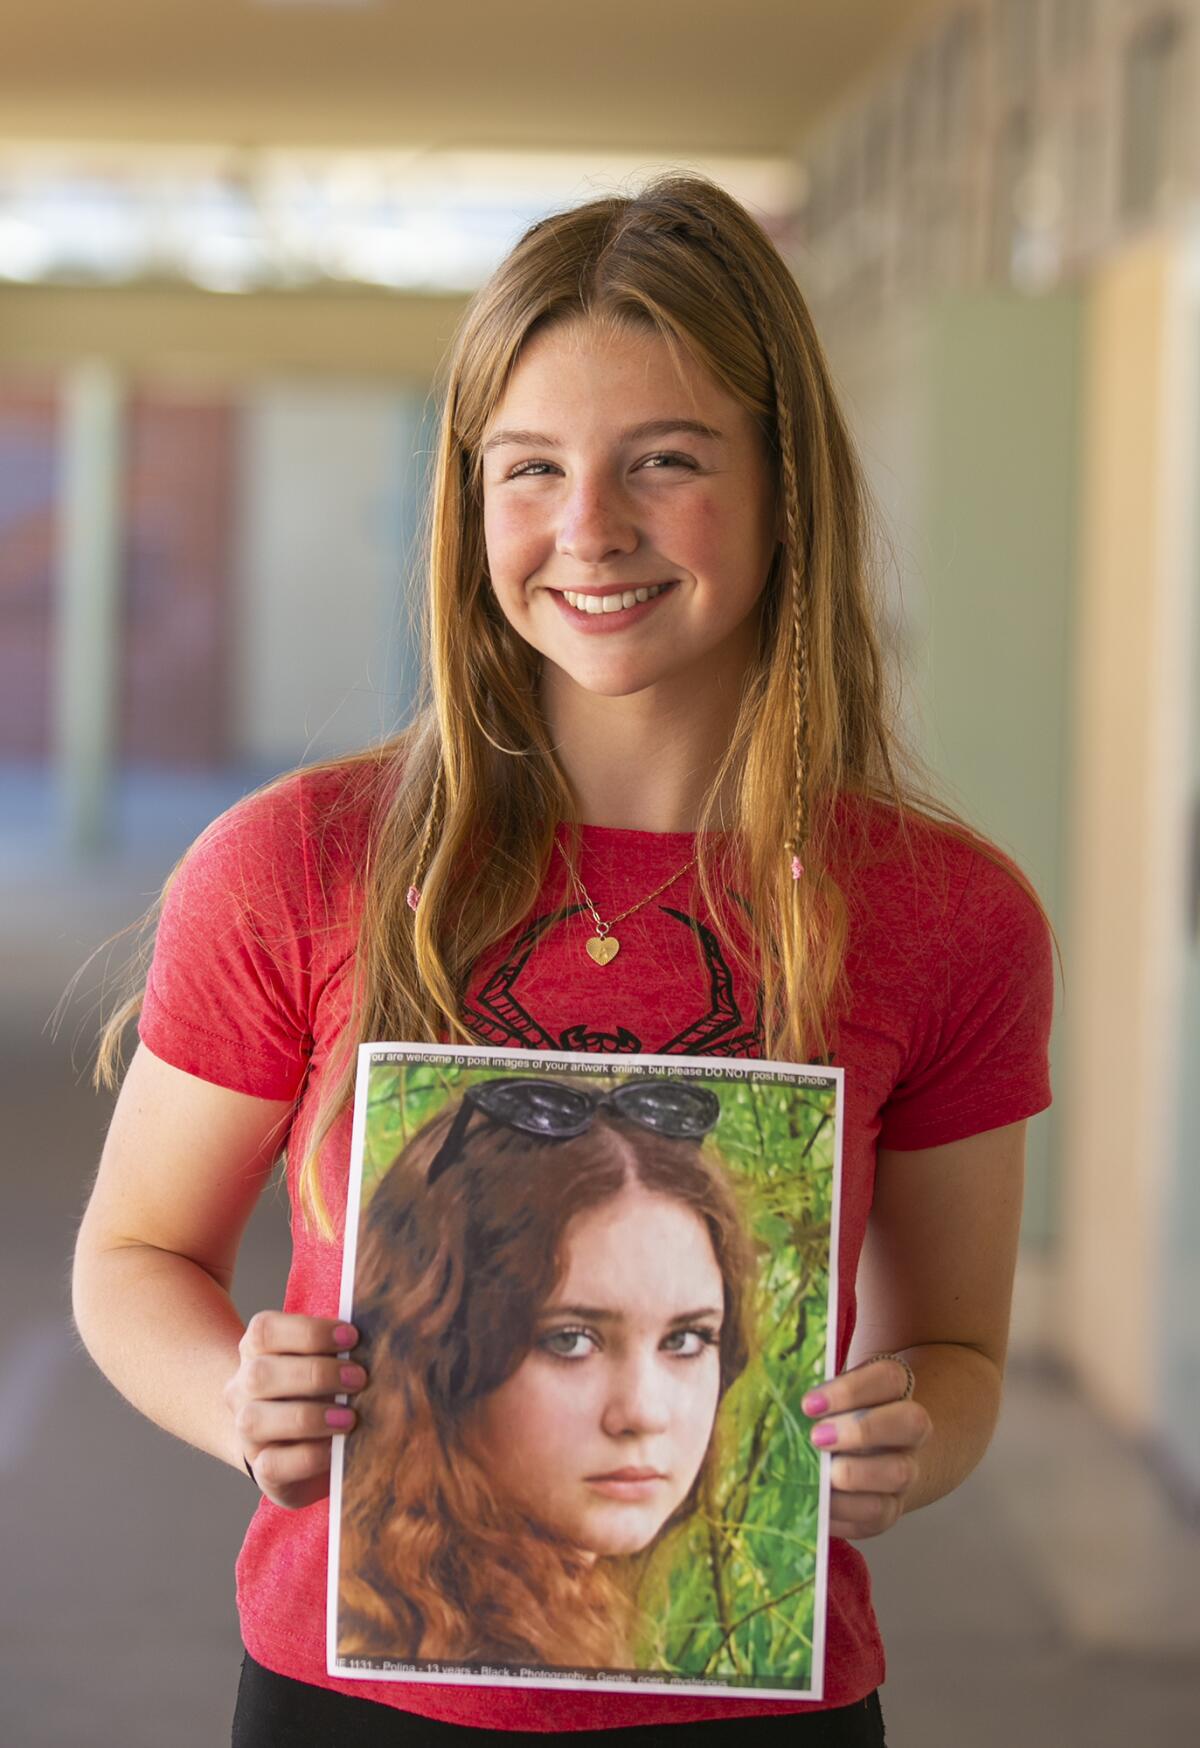 Costa Mesa student Allie Trask, 14, with a picture of the student she painted Polina.